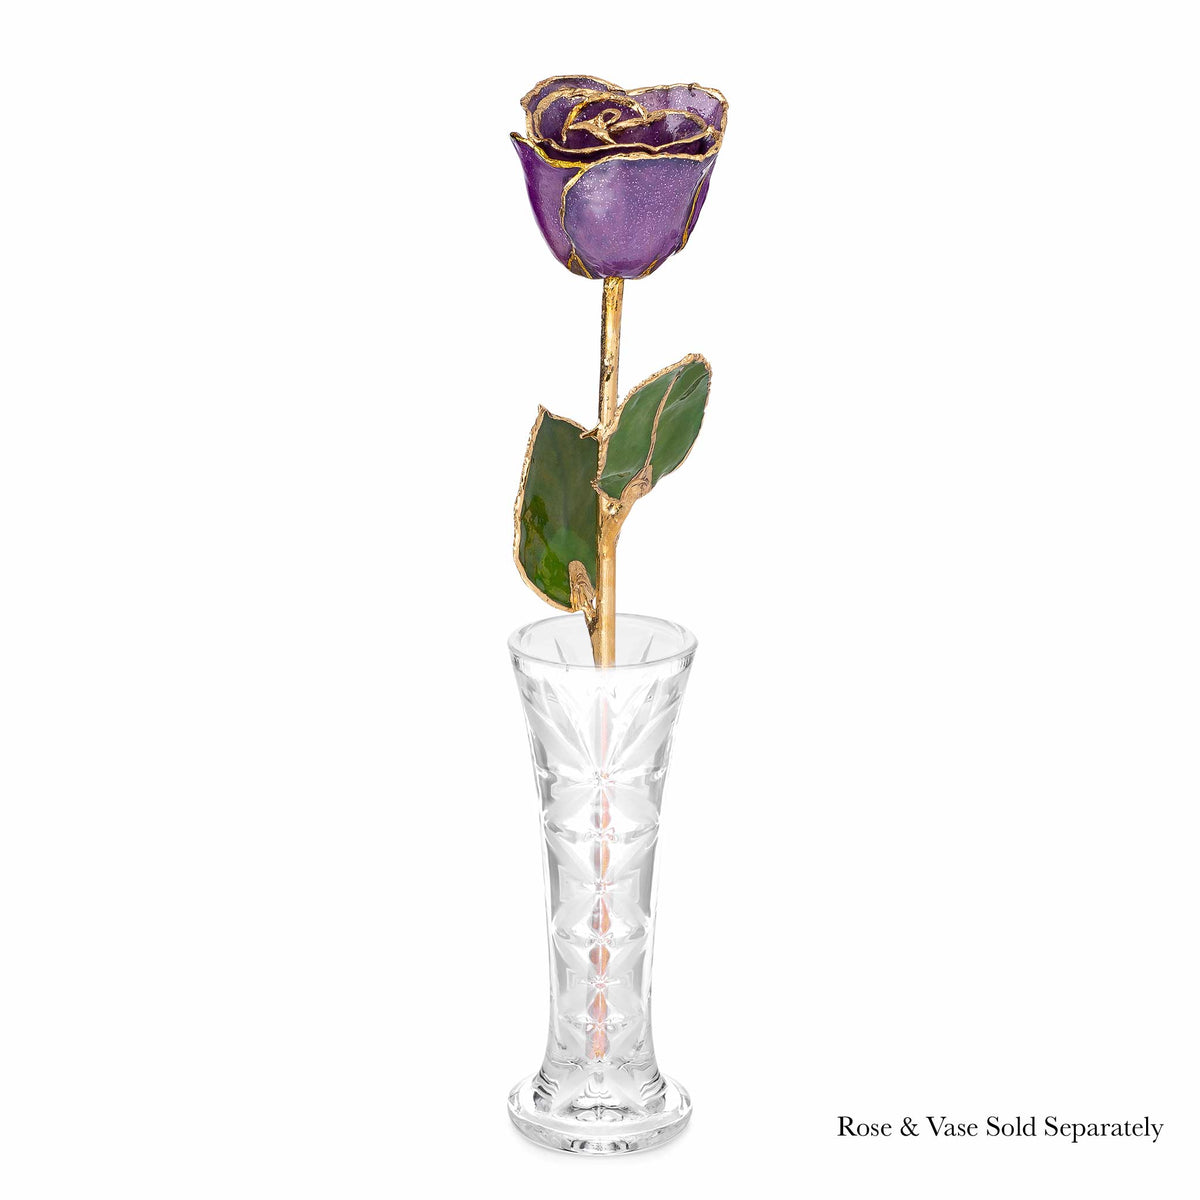 24K Gold Trimmed Forever Rose with Amethyst (purple color) with sparkles suspended in the finish. View of Stem, Leaves, and Rose Petals and Showing Detail of Gold. shown with optional vase.